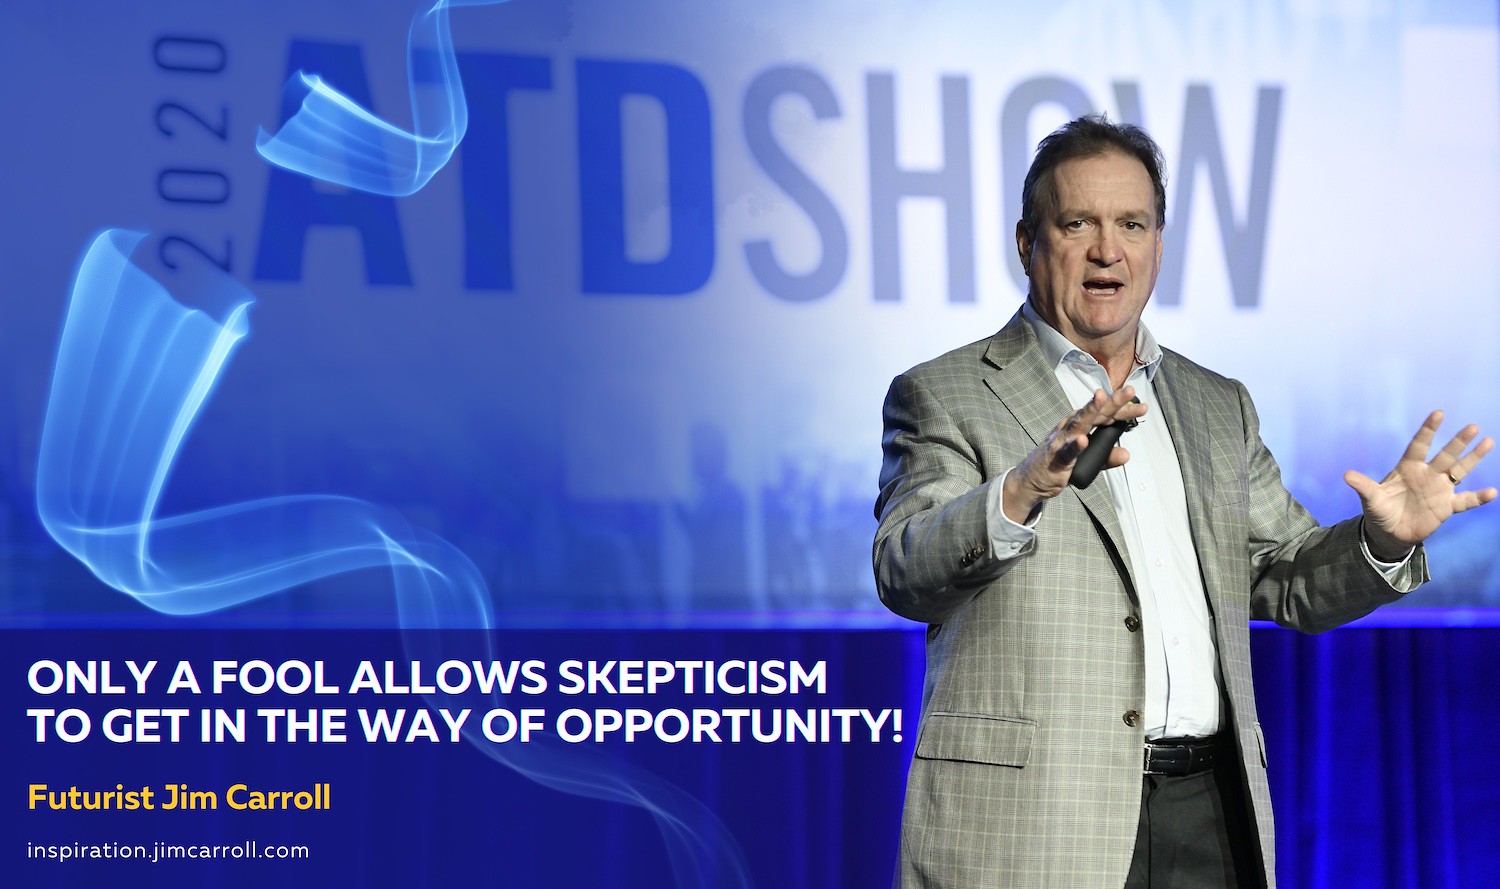 "Only a fool allows skepticism to get in the way of opportunity!" - Futurist Jim Carroll